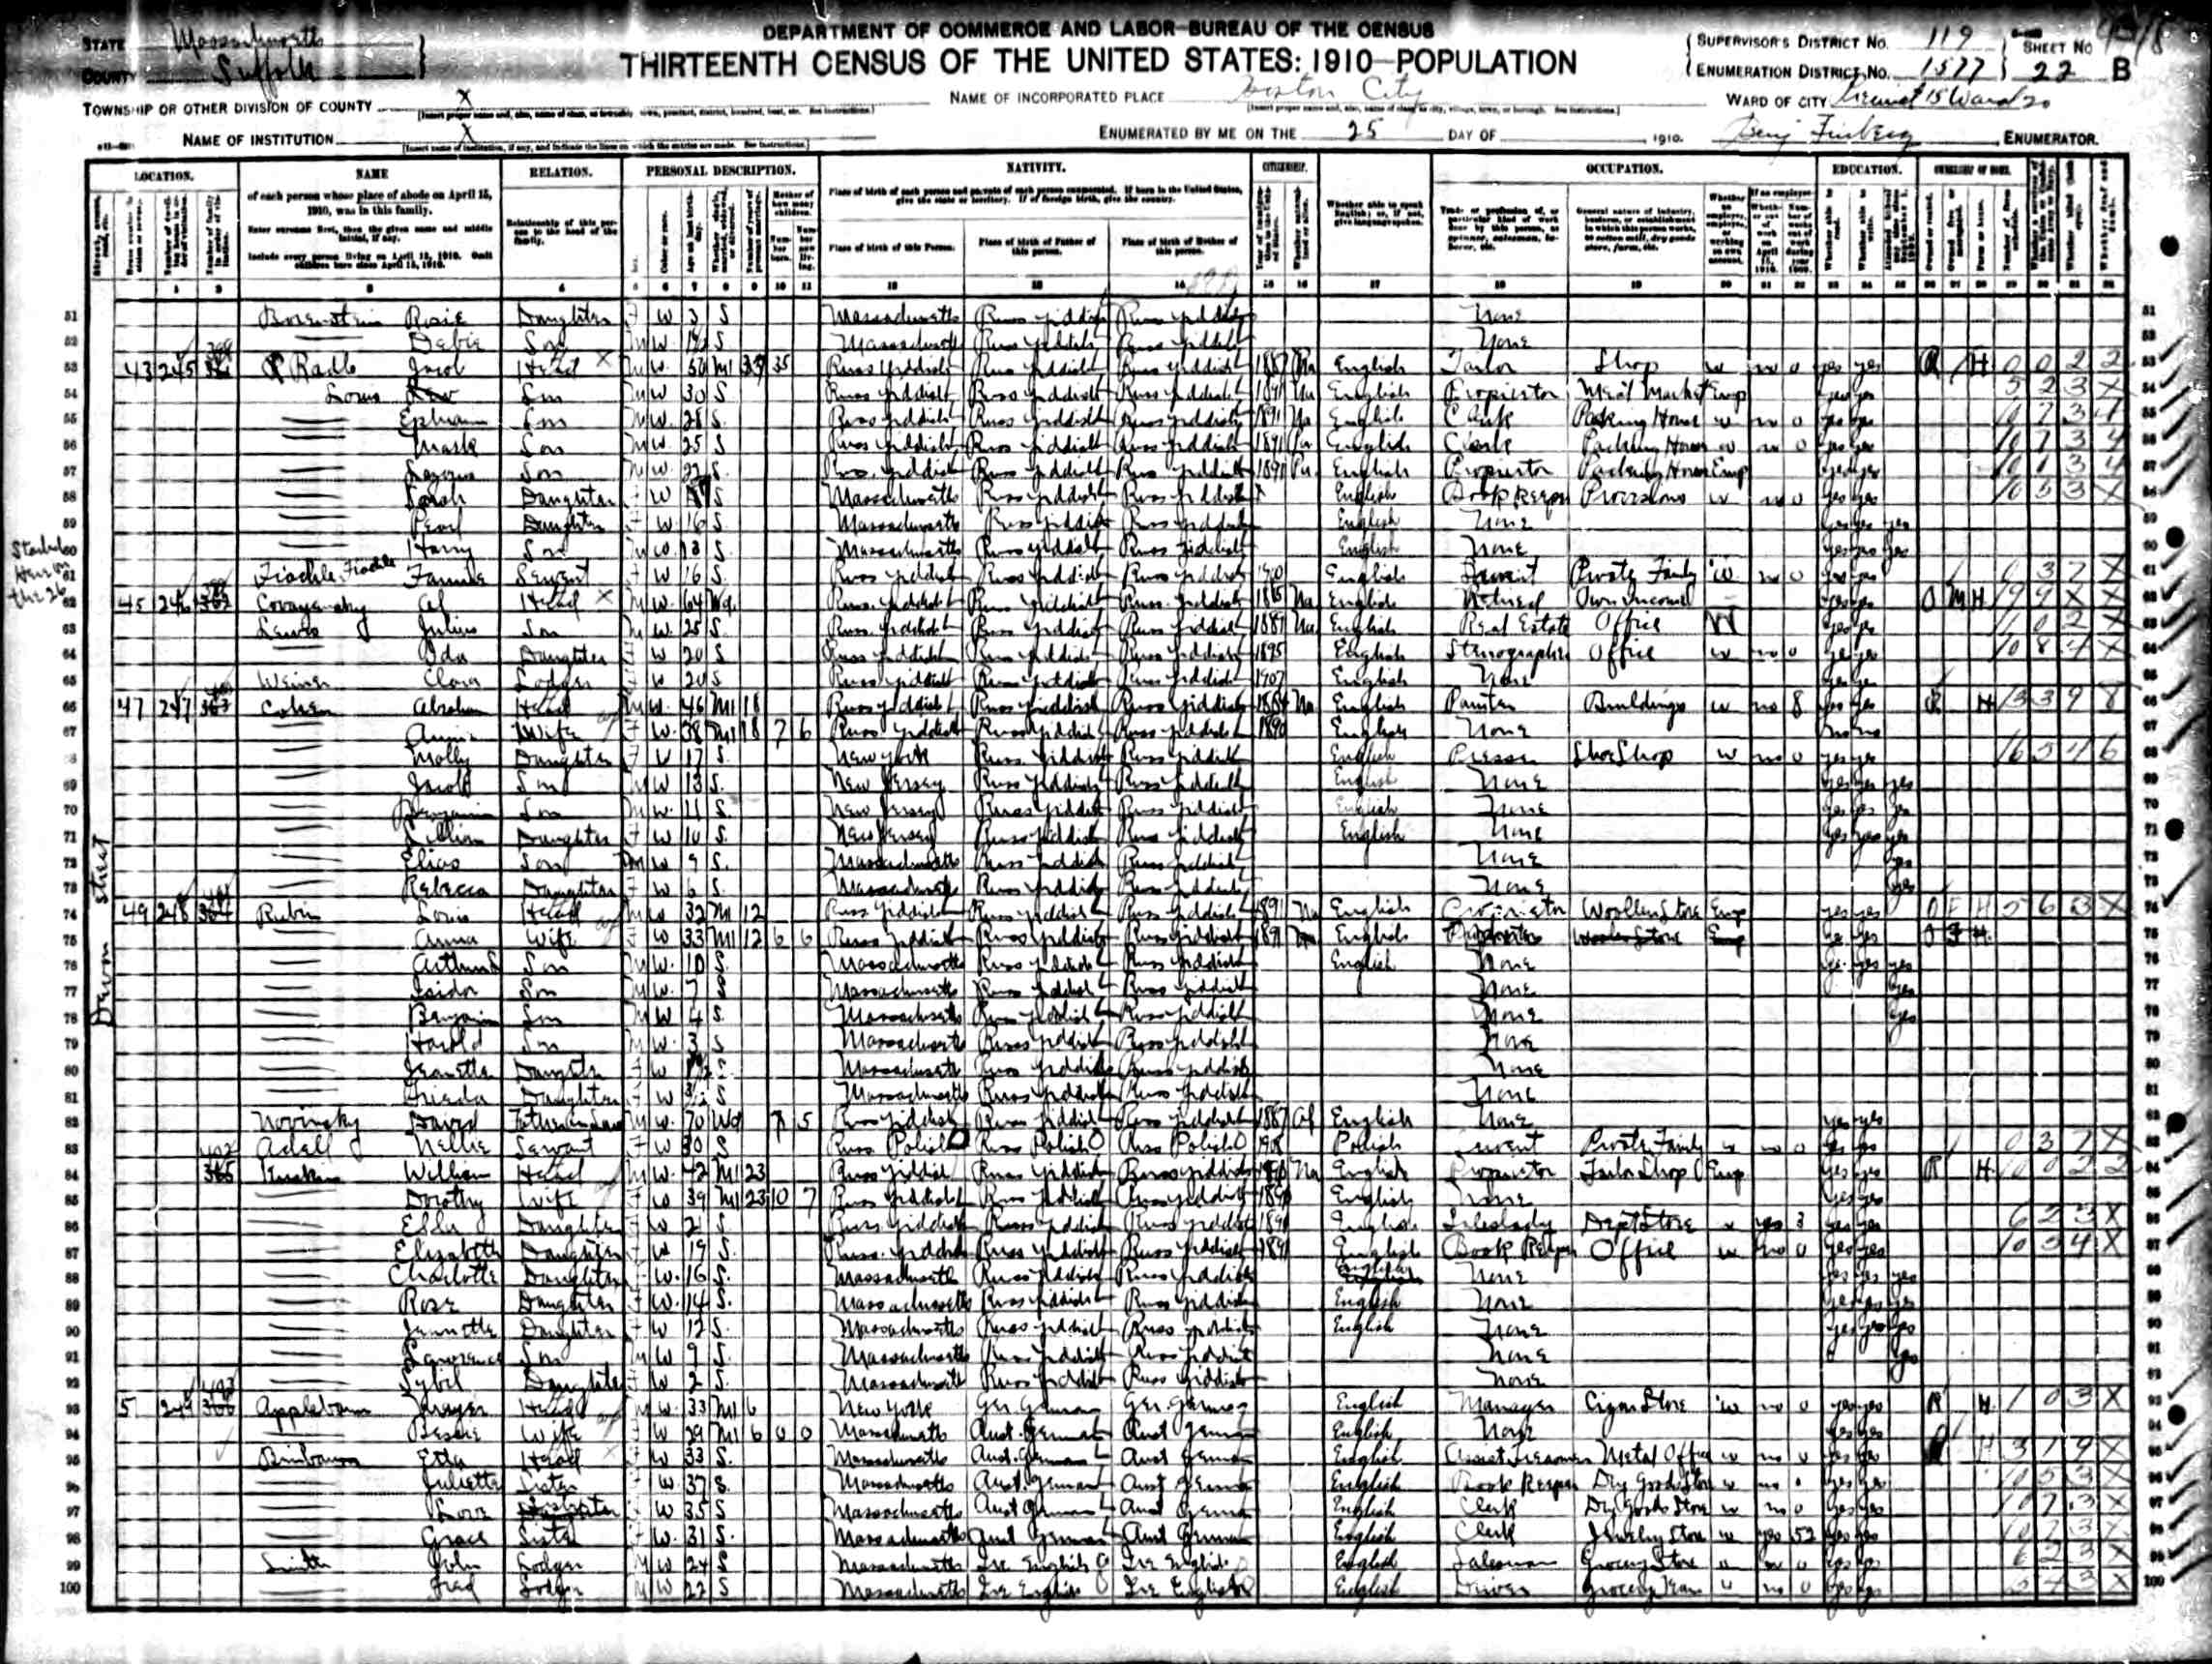 Image of a 1910 census page